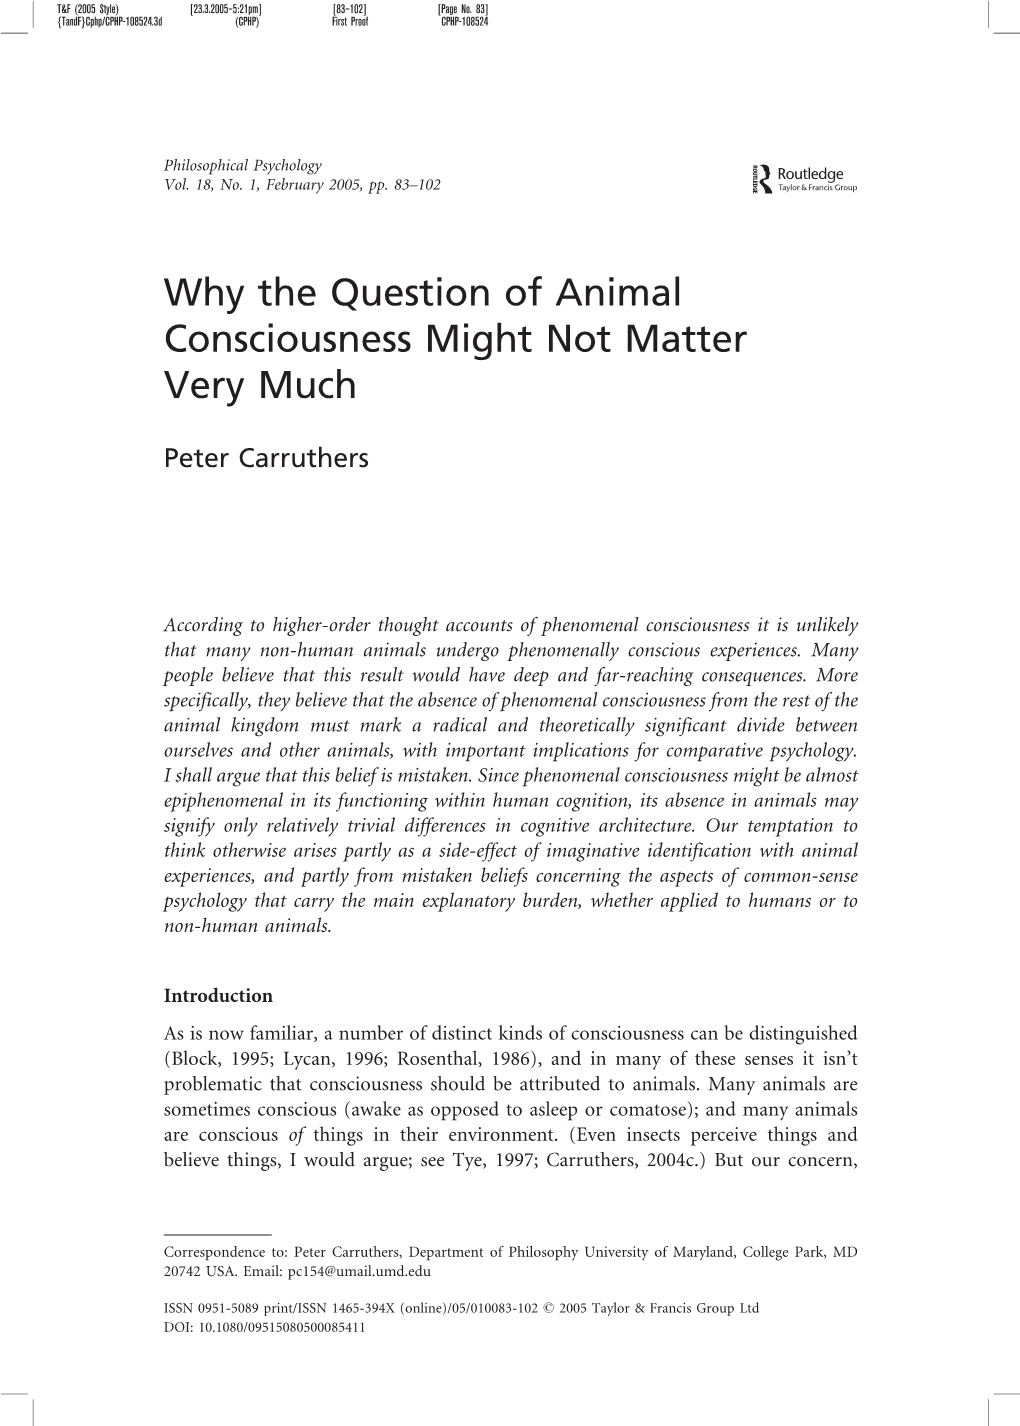 Why the Question of Animal Consciousness Might Not Matter Very Much